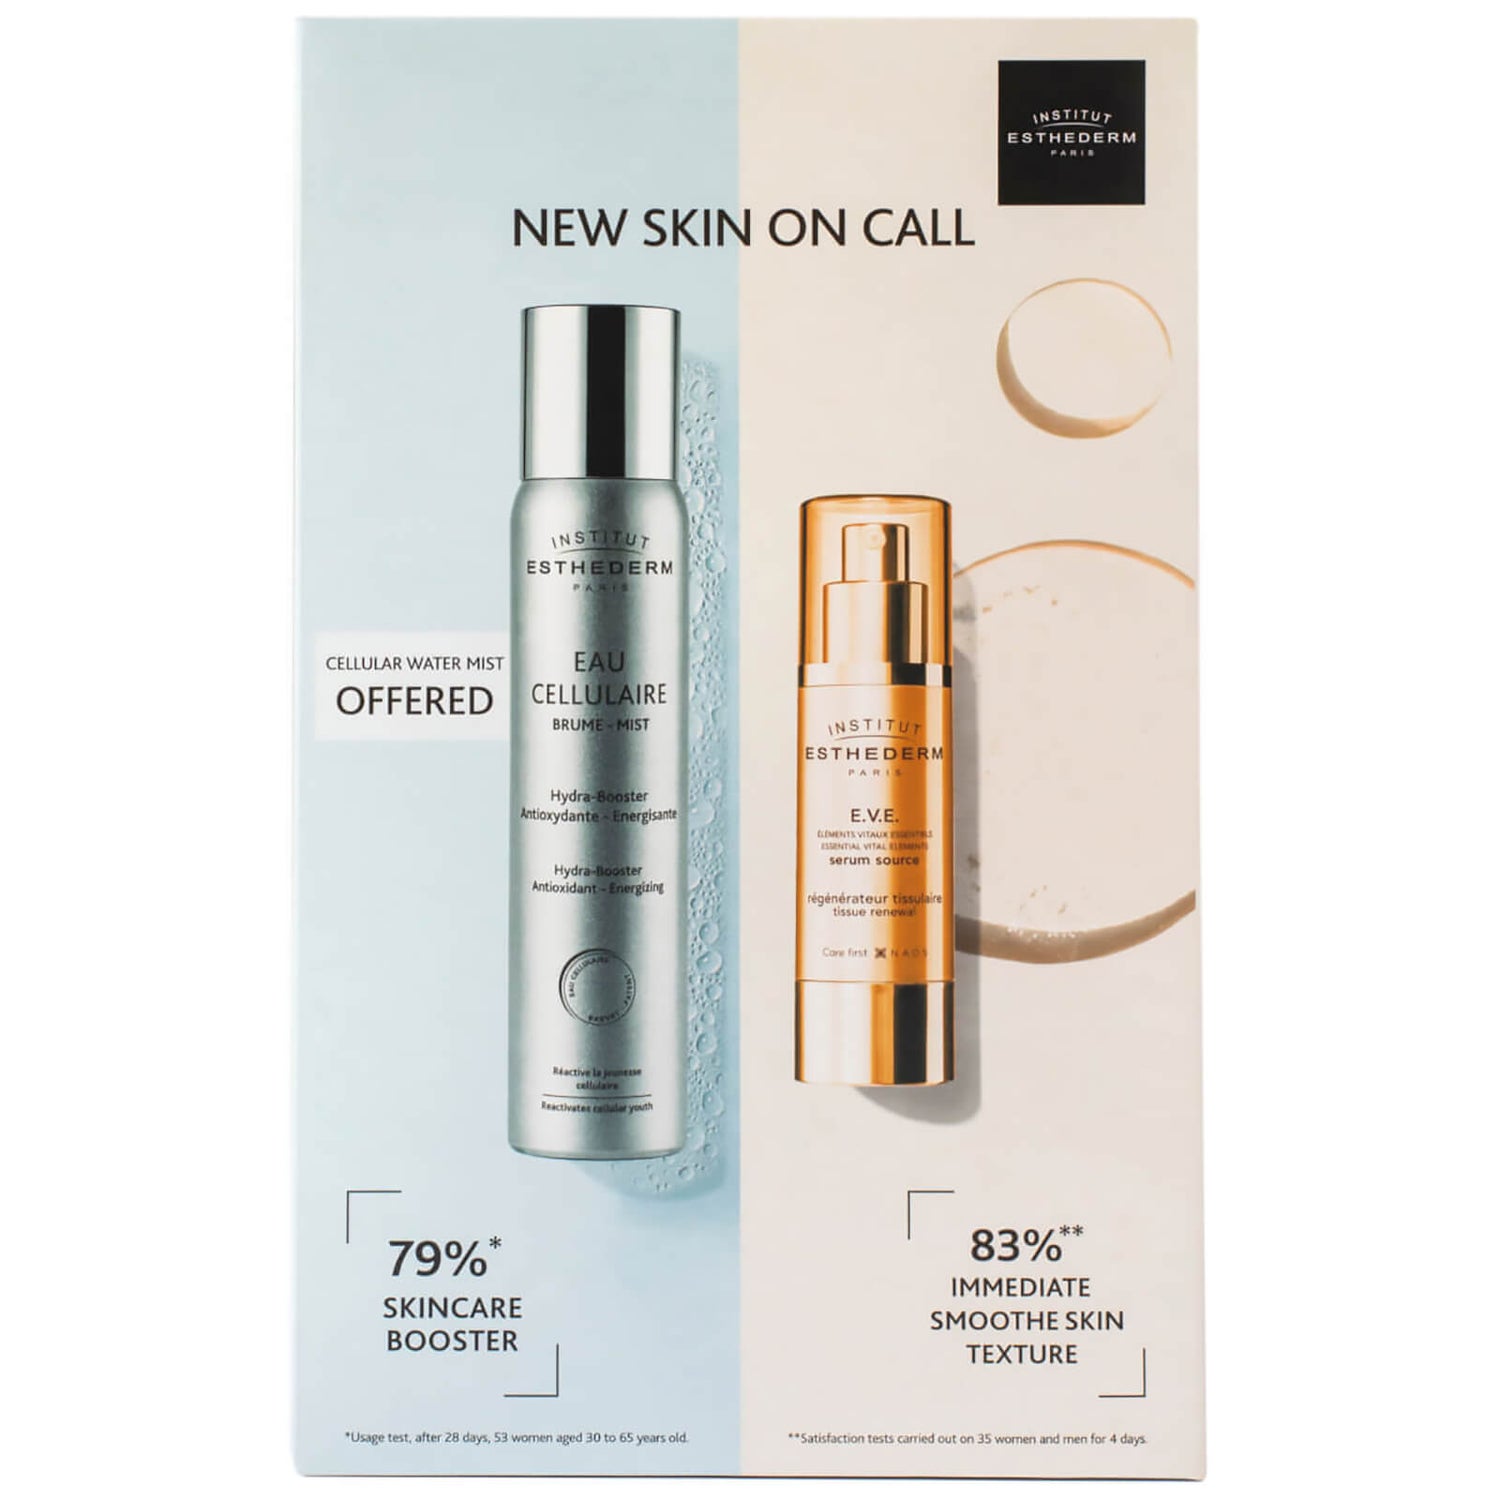 Institut Esthederm New Skin on Call Kit (Worth £95.00)